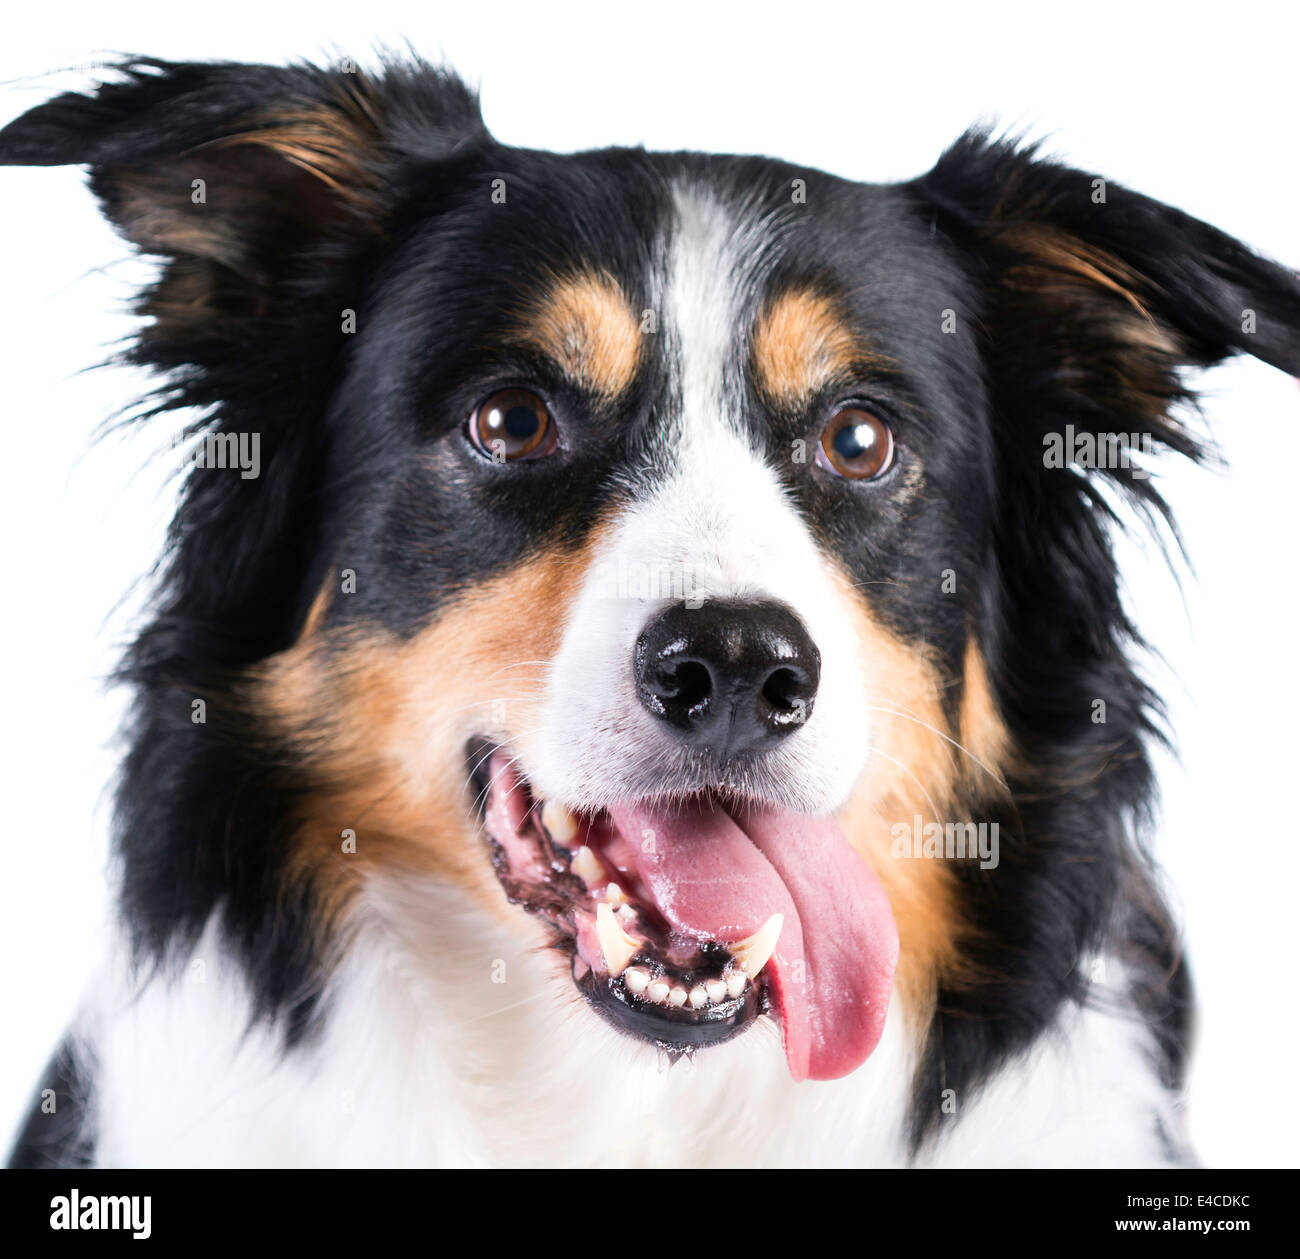 Border Collie Dog photographed in Studio with tongue out. Stock Photo